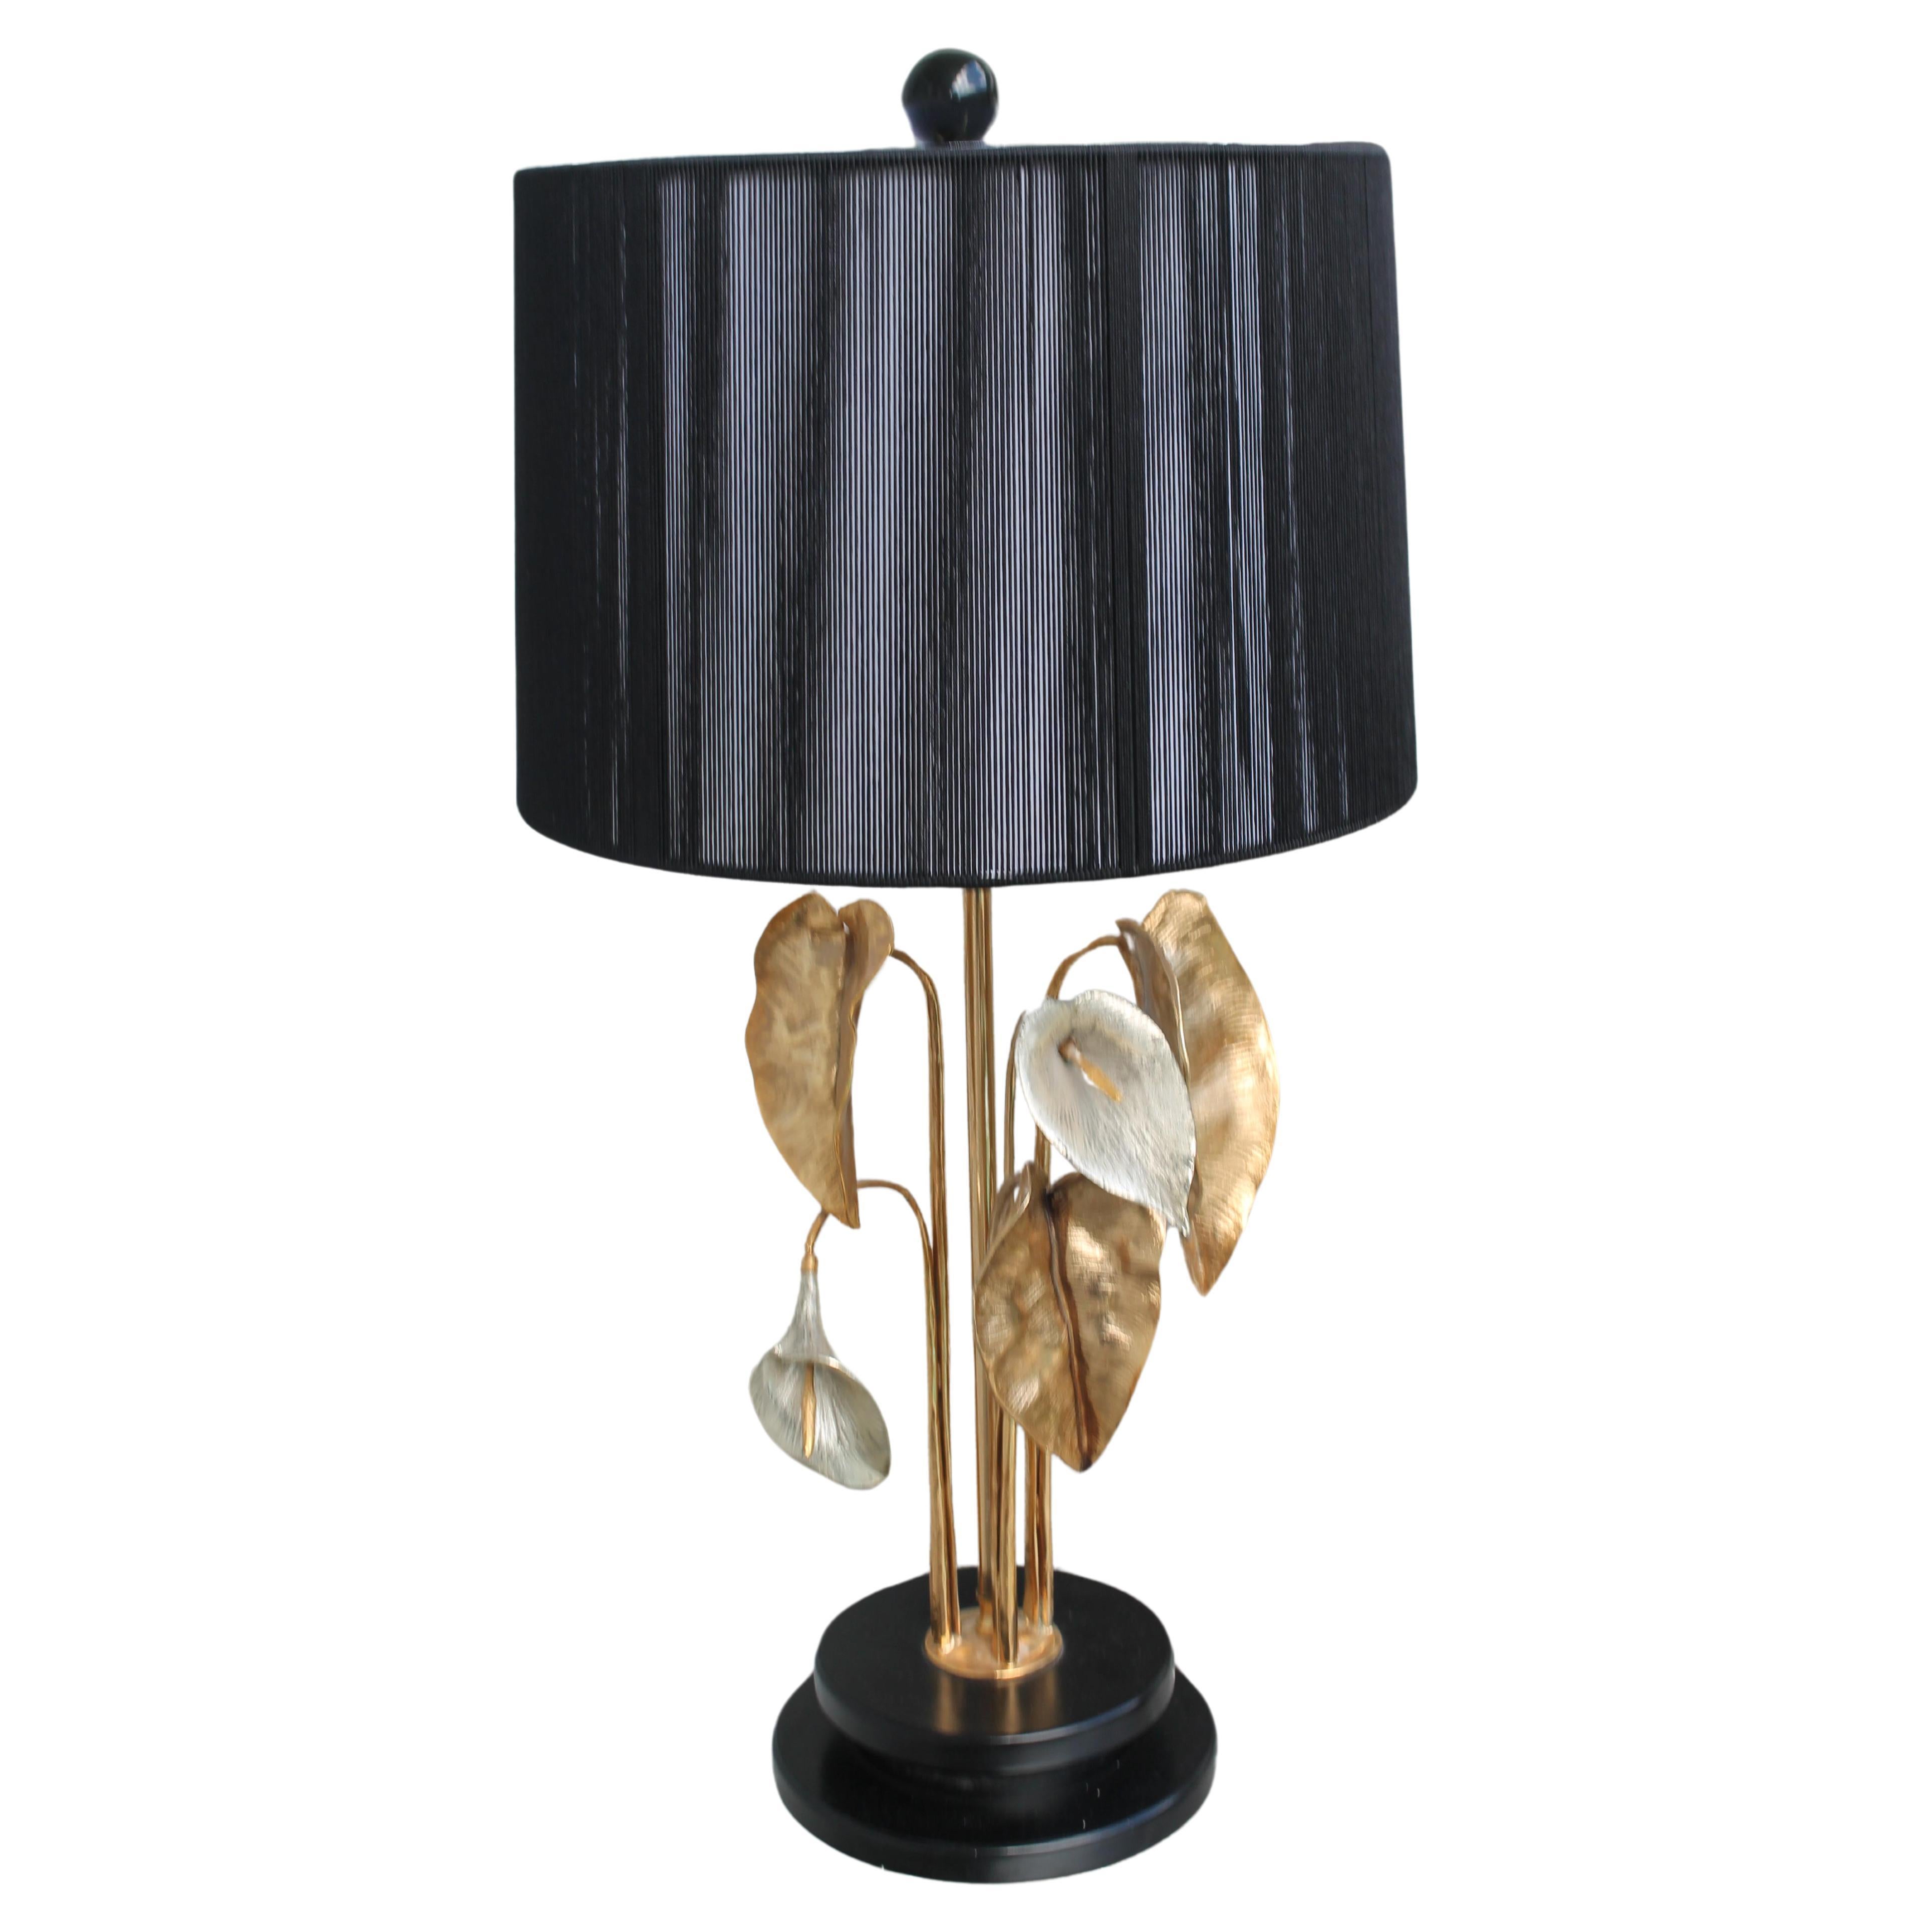 1970s French Mid Century Modern Nenuphar Bronze Water Lilies Table Lamp -Charles